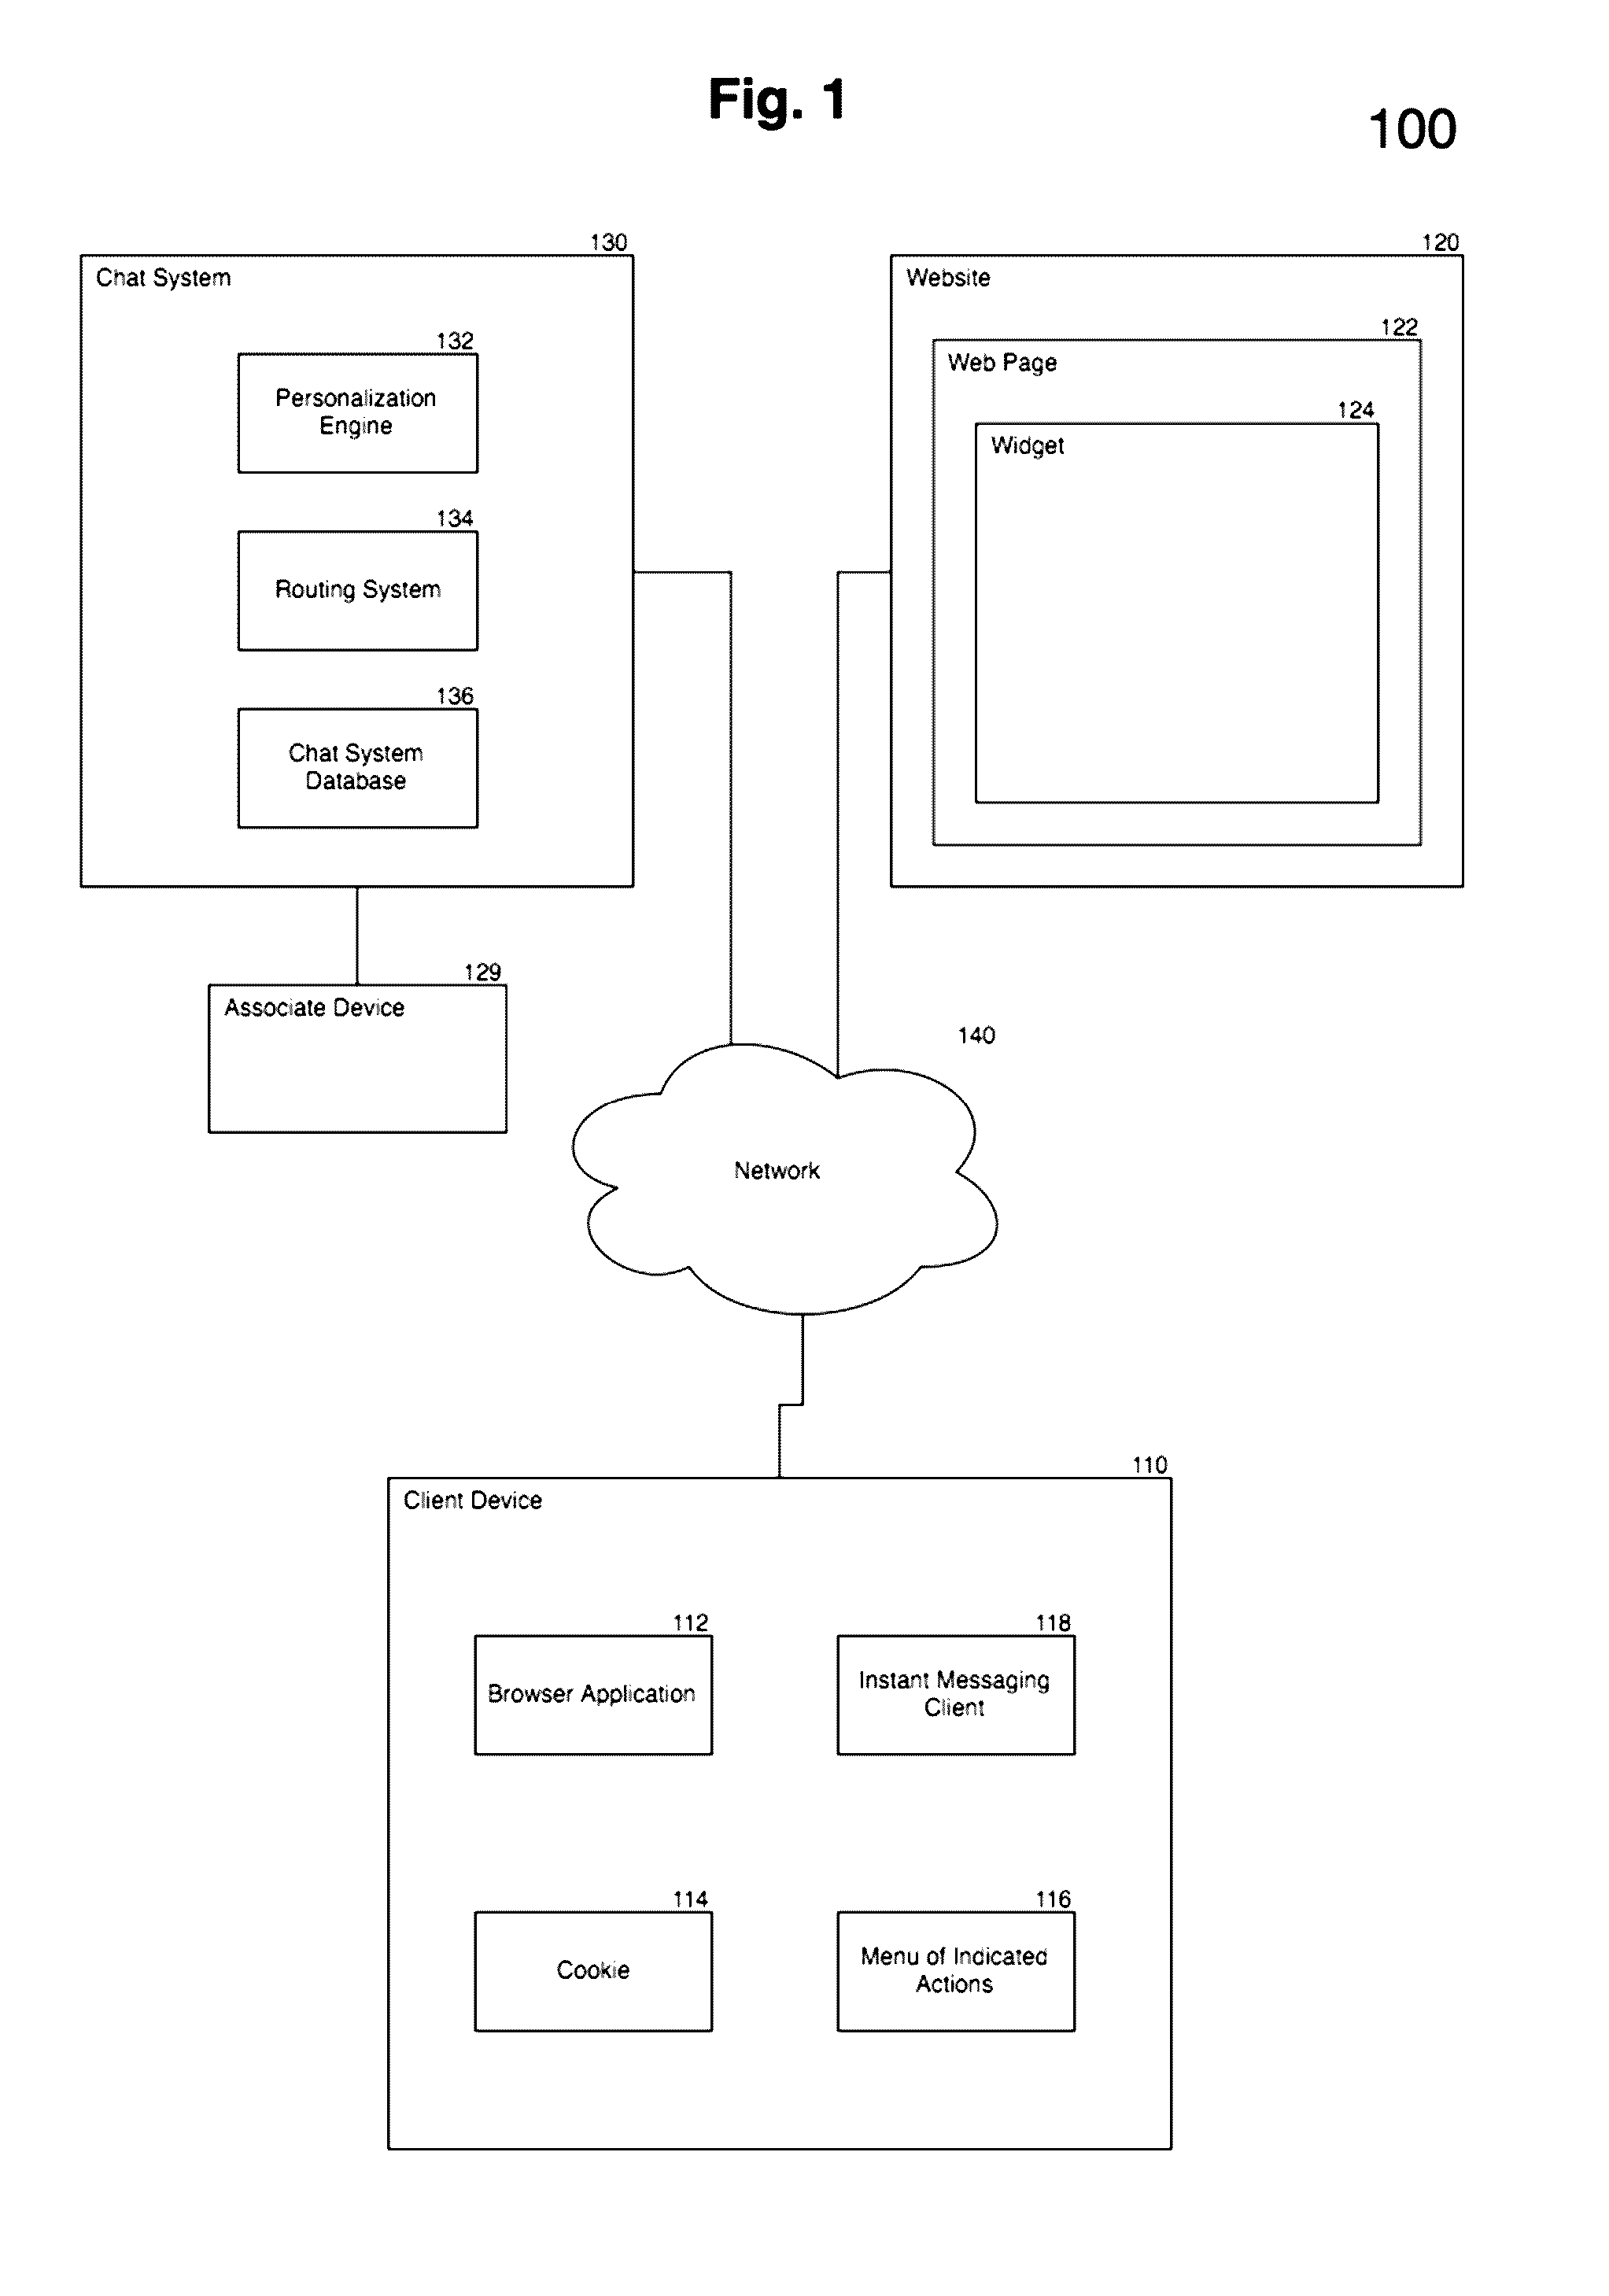 Method and apparatus to increase personalization and enhance chat experiences on the internet